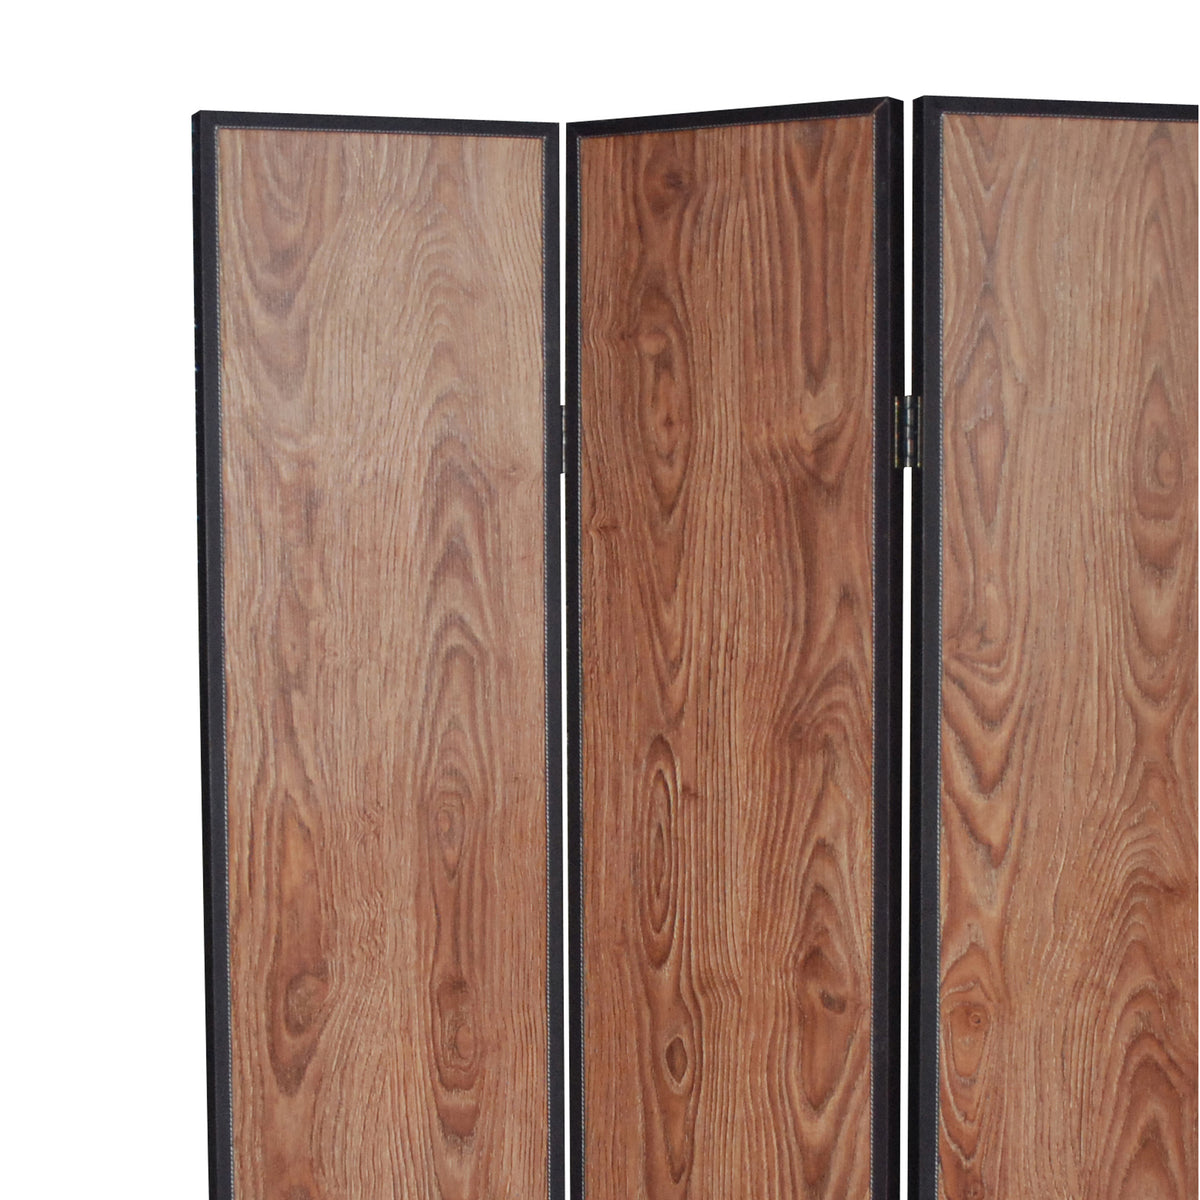 3 Panel Foldable Wooden Screen with Grain Details, Brown - BM26601